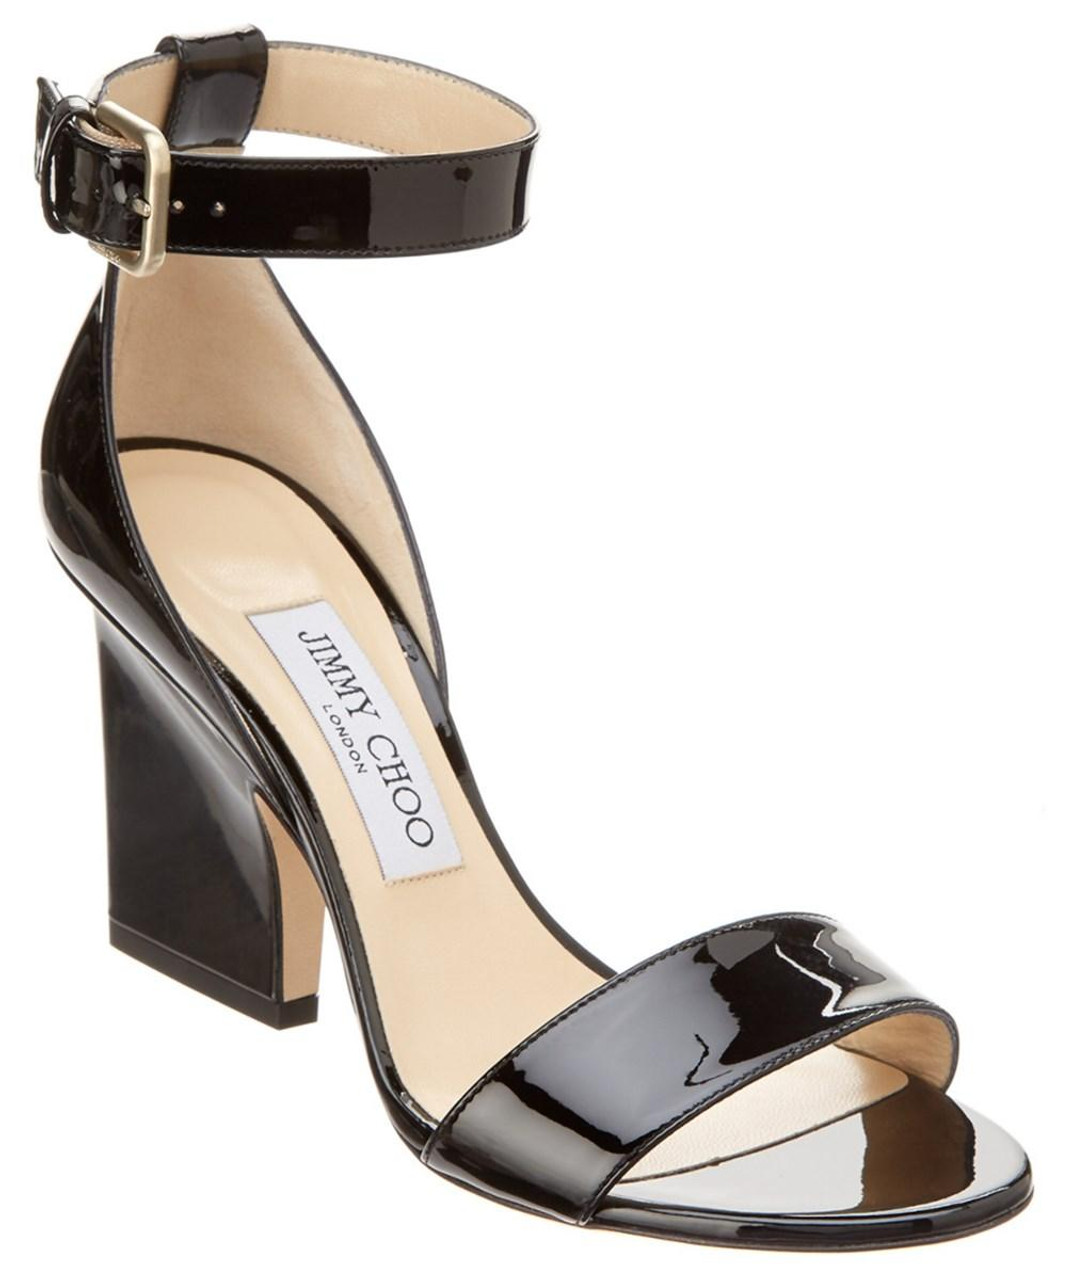 Jimmy Choo Wedges & Wedge sandals for Women new arrivals - new in |  FASHIOLA.com